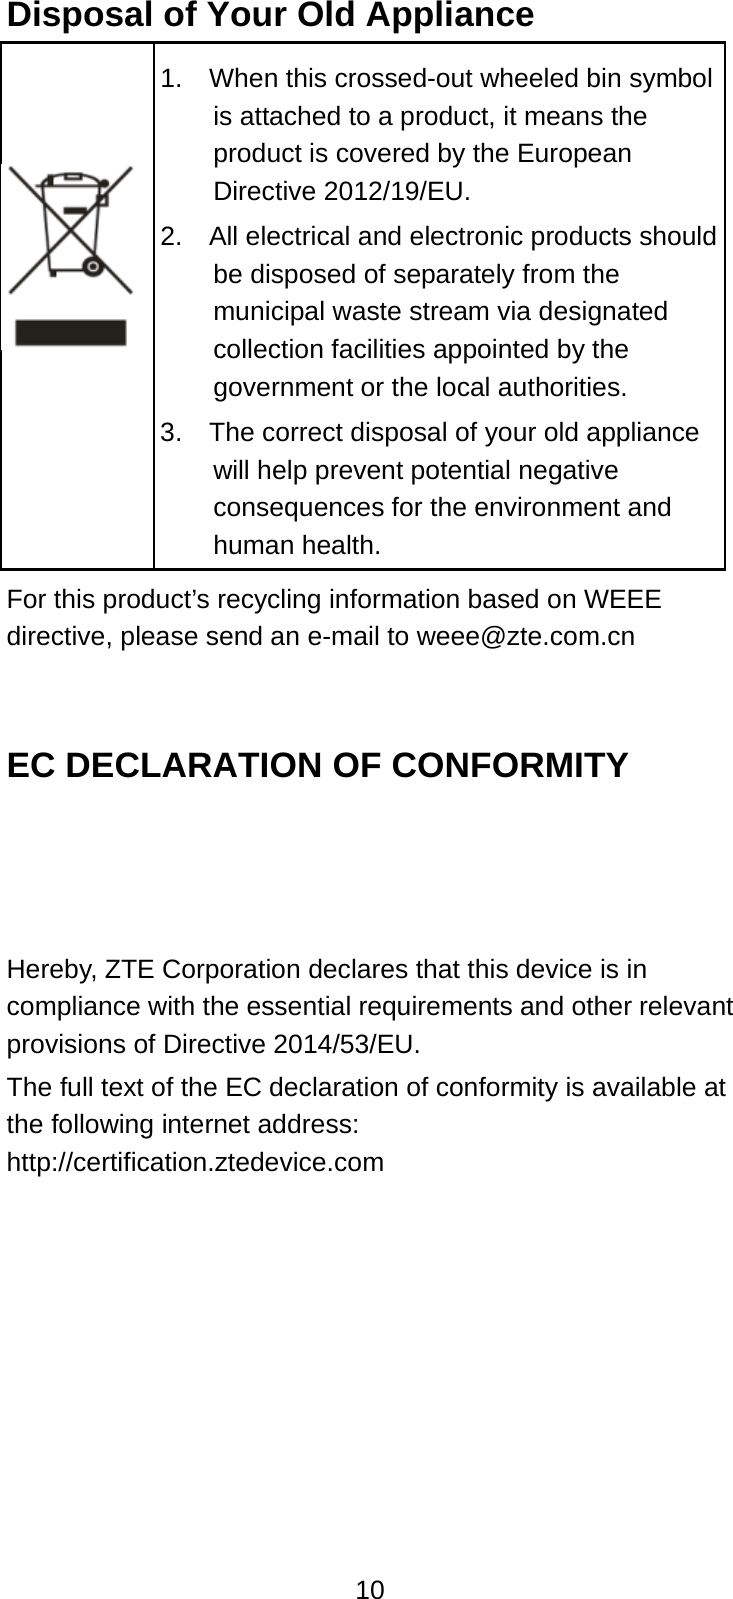  10 Disposal of Your Old Appliance  1.    When this crossed-out wheeled bin symbol is attached to a product, it means the product is covered by the European Directive 2012/19/EU. 2.  All electrical and electronic products should be disposed of separately from the municipal waste stream via designated collection facilities appointed by the government or the local authorities. 3.    The correct disposal of your old appliance will help prevent potential negative consequences for the environment and human health. For this product’s recycling information based on WEEE directive, please send an e-mail to weee@zte.com.cn   EC DECLARATION OF CONFORMITY    Hereby, ZTE Corporation declares that this device is in compliance with the essential requirements and other relevant provisions of Directive 2014/53/EU. The full text of the EC declaration of conformity is available at the following internet address: http://certification.ztedevice.com        